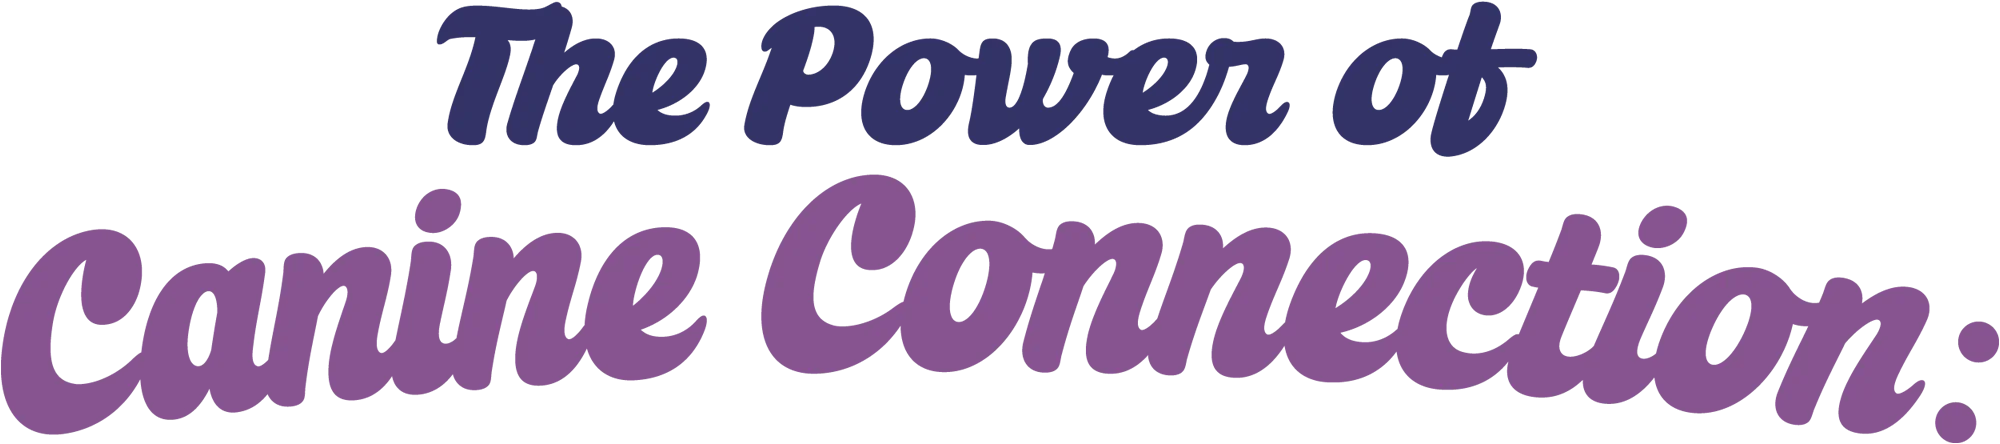 The Power of Canine Connection script typography in blue-violet and purple